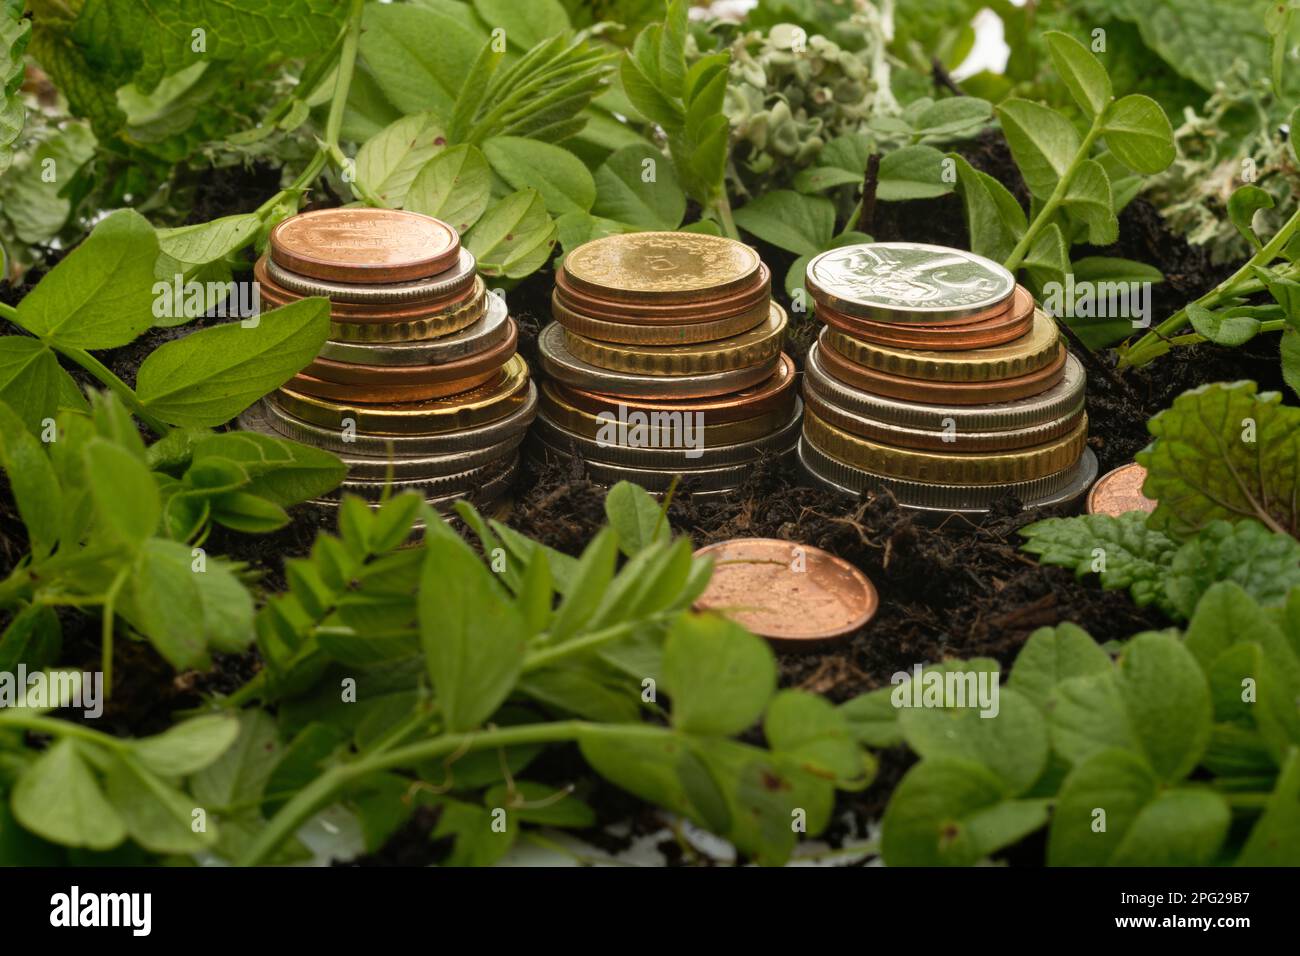 Three stacks of coins, surrounded by soil (growing medium) and new green plant leaves (recovery growth) Stock Photo